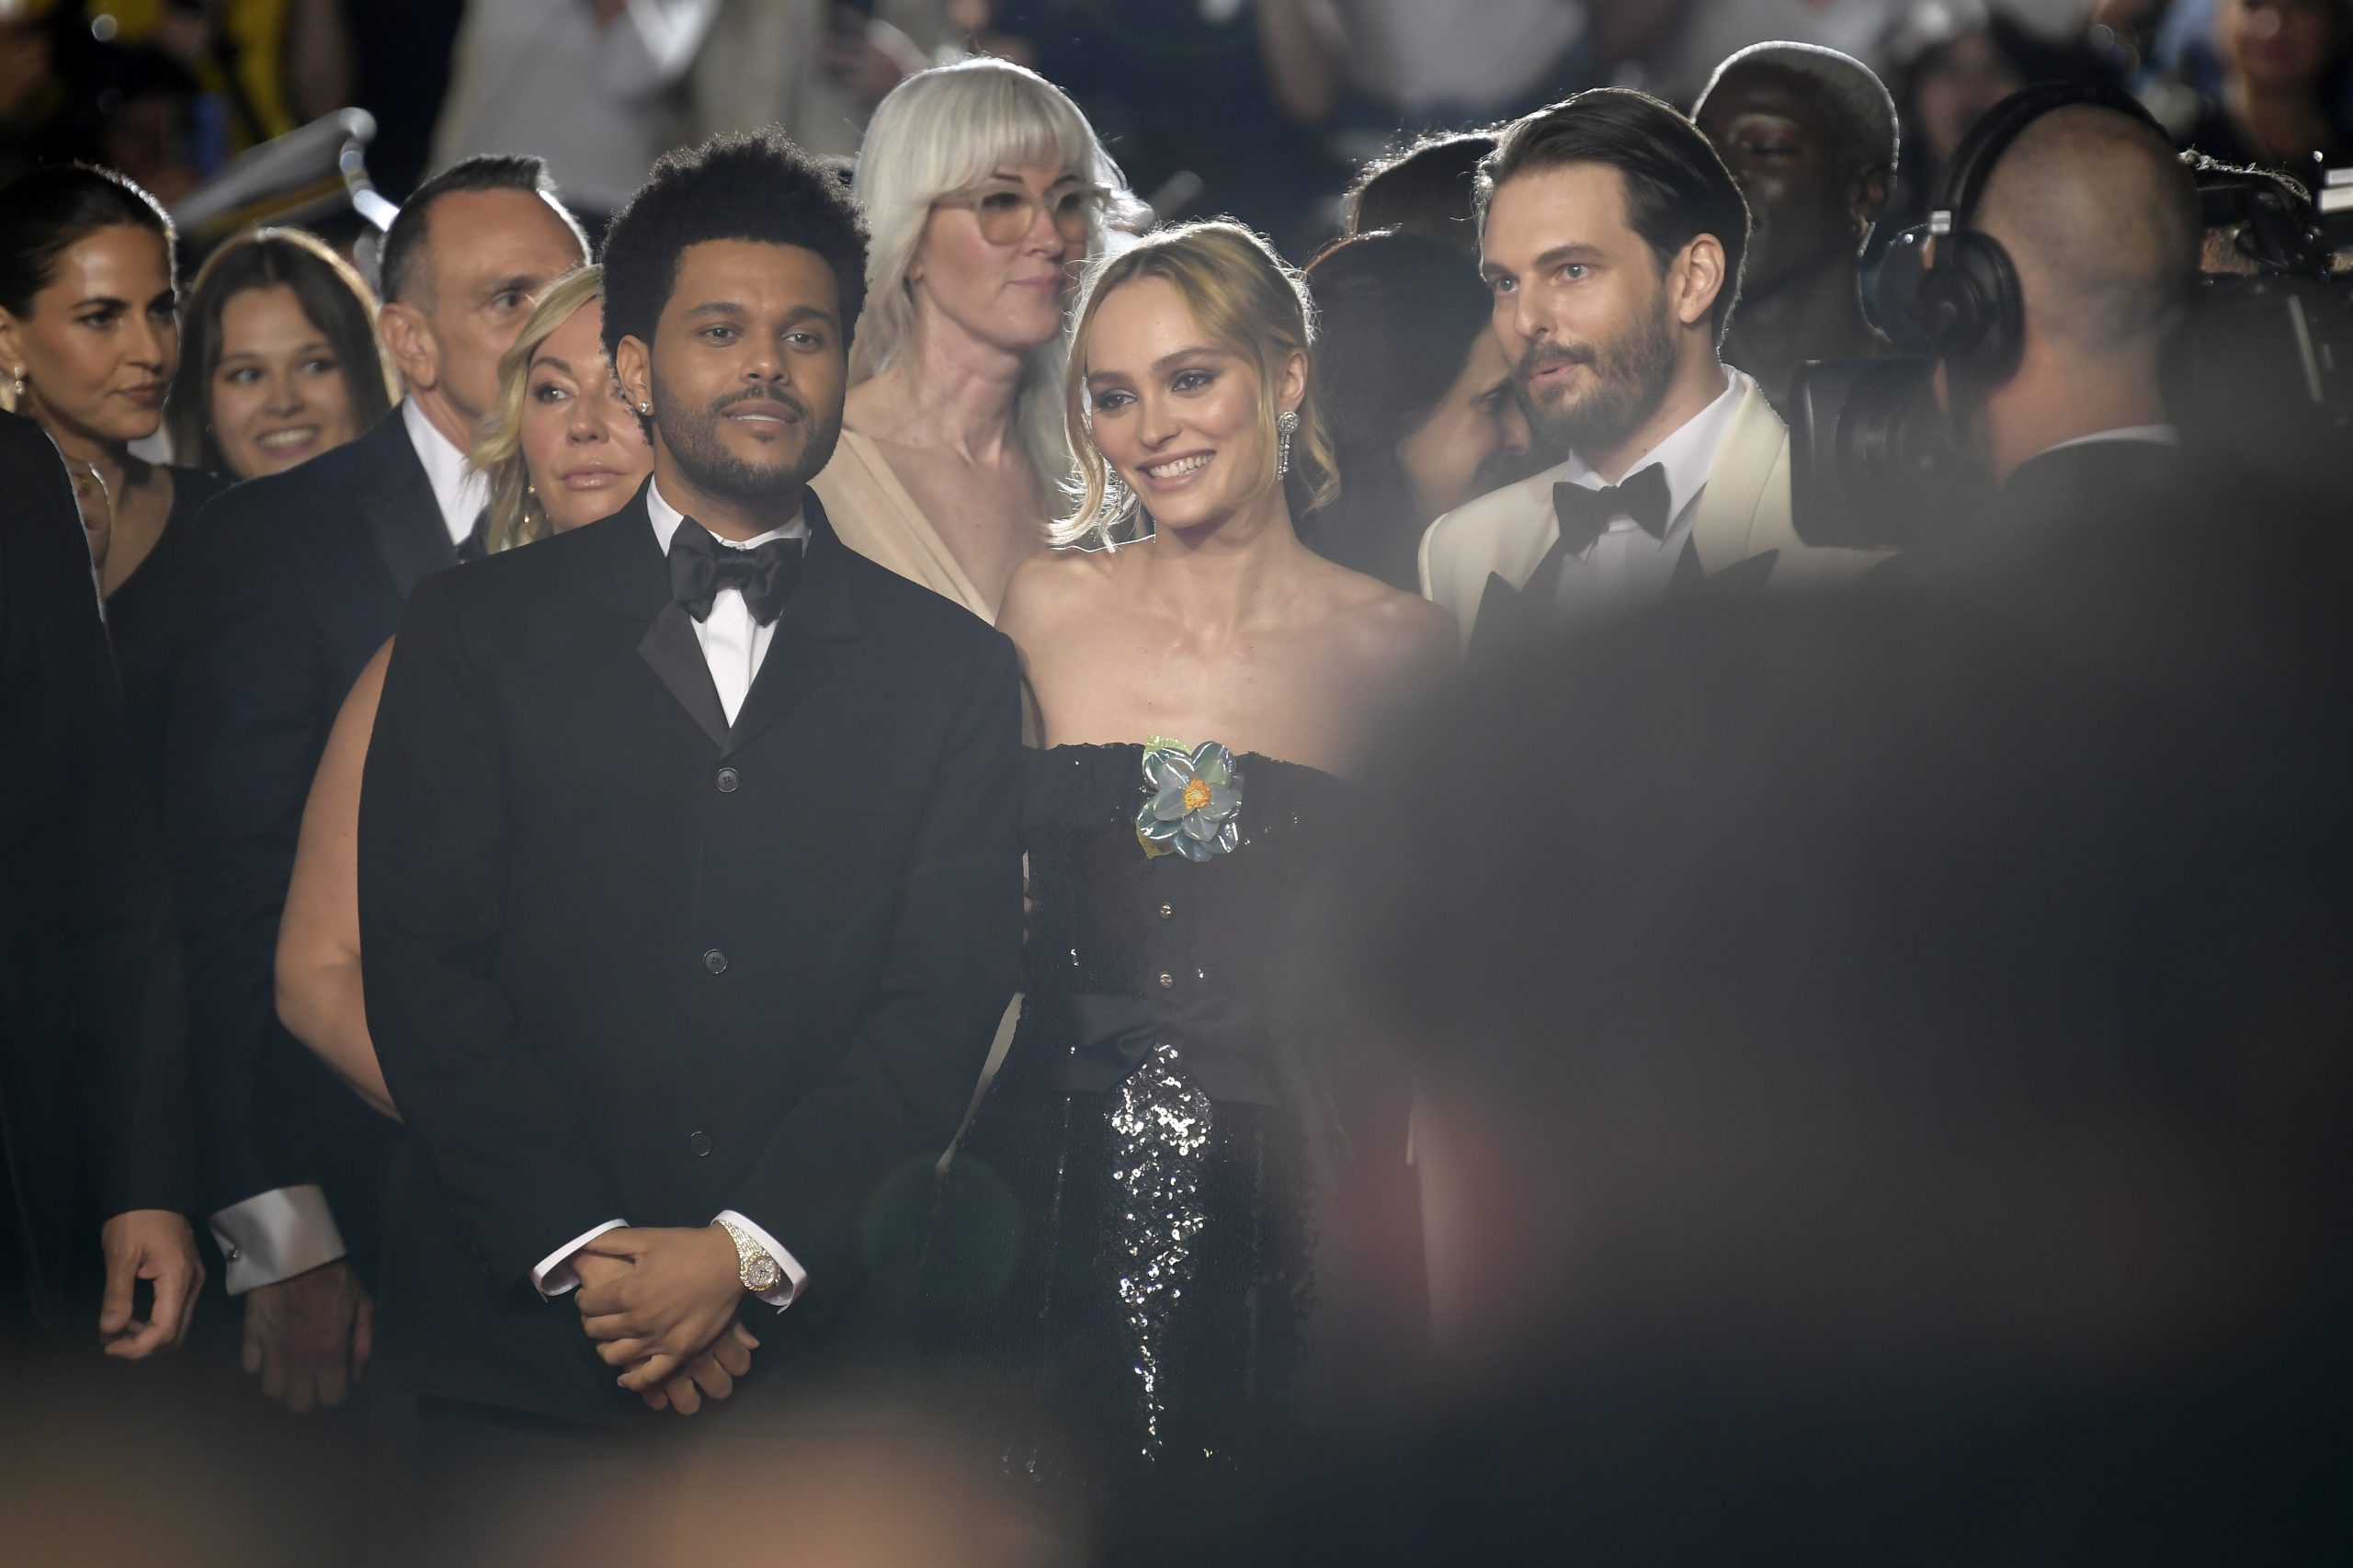 CANNES, FRANCE - MAY 22: (L-R) Abel “The Weeknd” Tesfaye, Lily-Rose Depp and Sam Levinson attend the "The Idol" red carpet during the 76th annual Cannes film festival at Palais des Festivals on May 22, 2023 in Cannes, France. (Photo by Kristy Sparow/Getty Images)